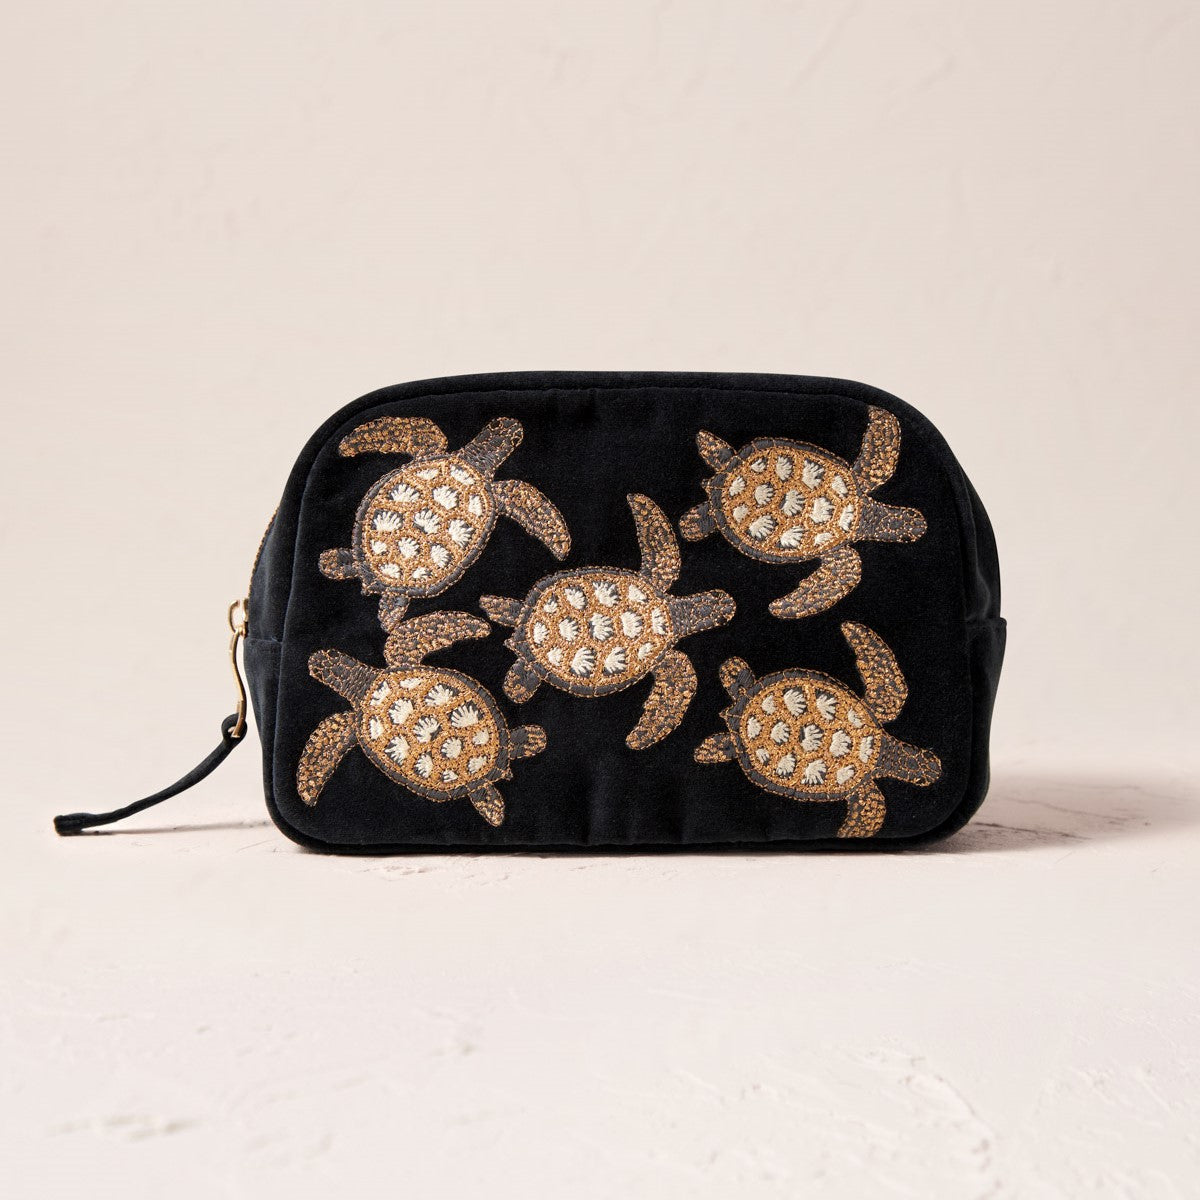 Embroidered Cosmetics Bag - Turtle Conservation Charcoal Velvet